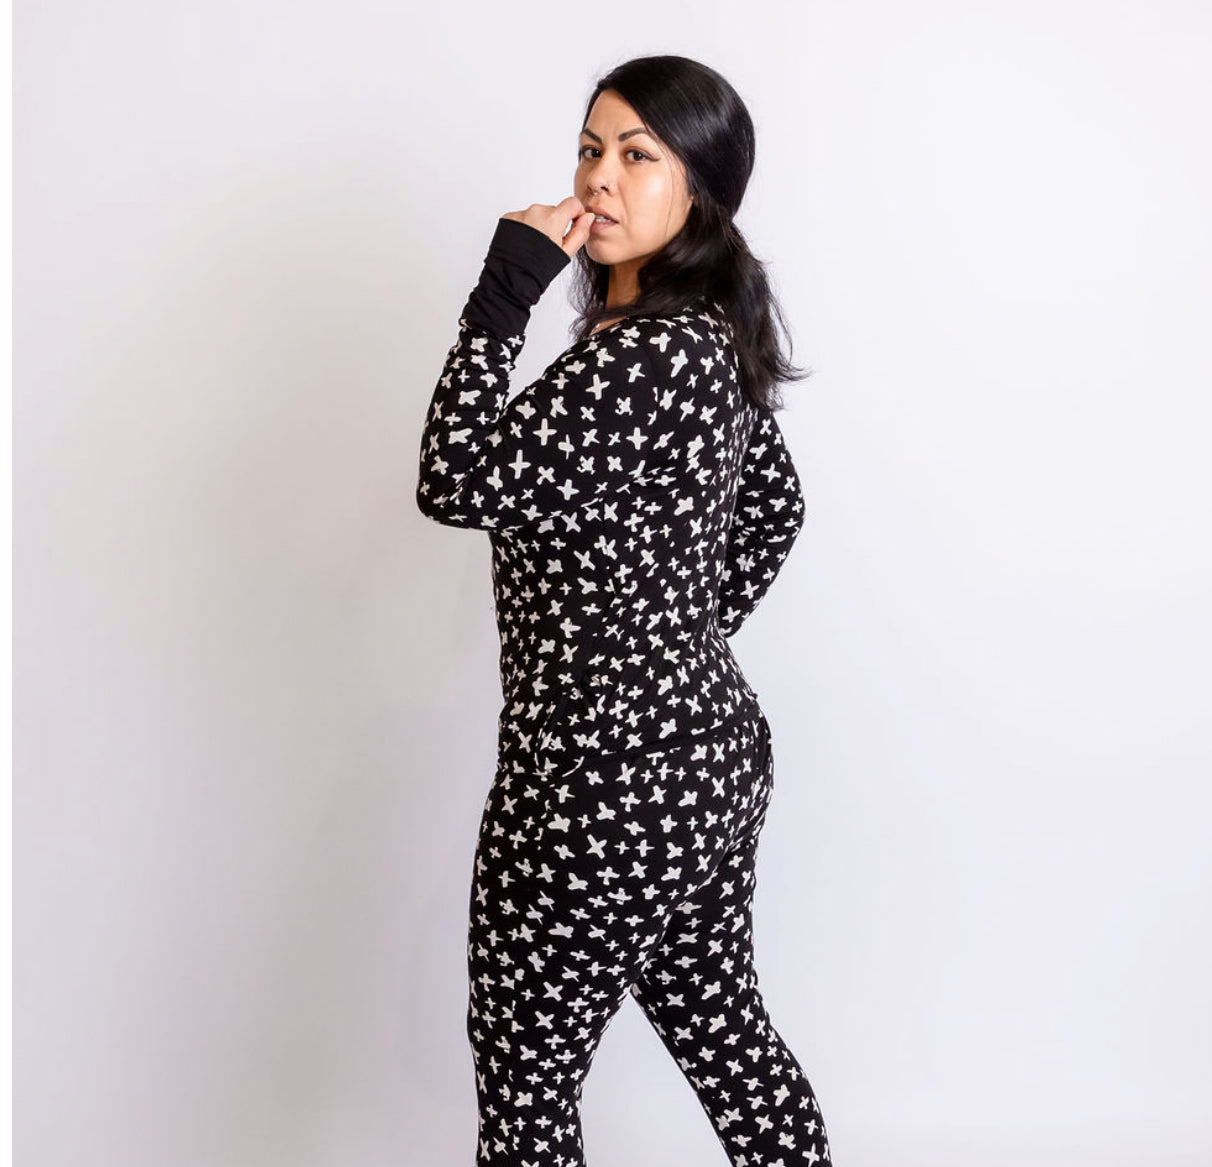 X Marks the Spot Black At Your Leisure Snap Down Adult Romper- 3X-5X